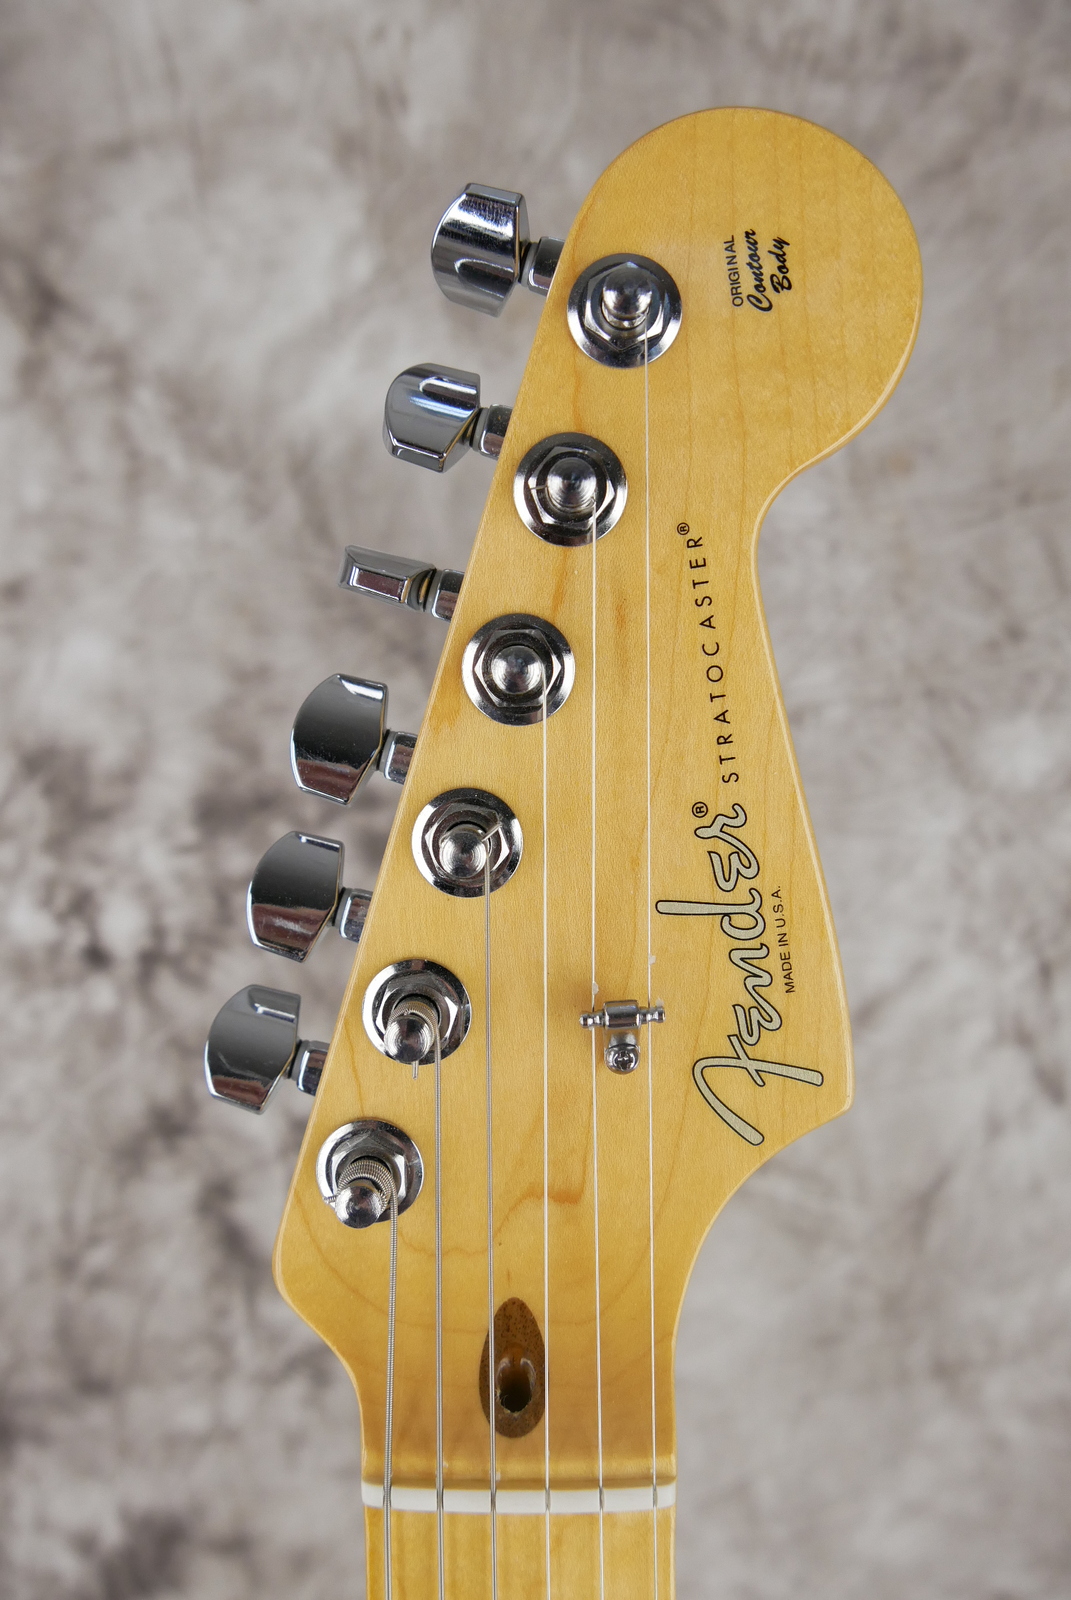 img/vintage/5279/Fender_Stratocaster_USA_built_from_parts_candy_apple_red_2015-009.JPG